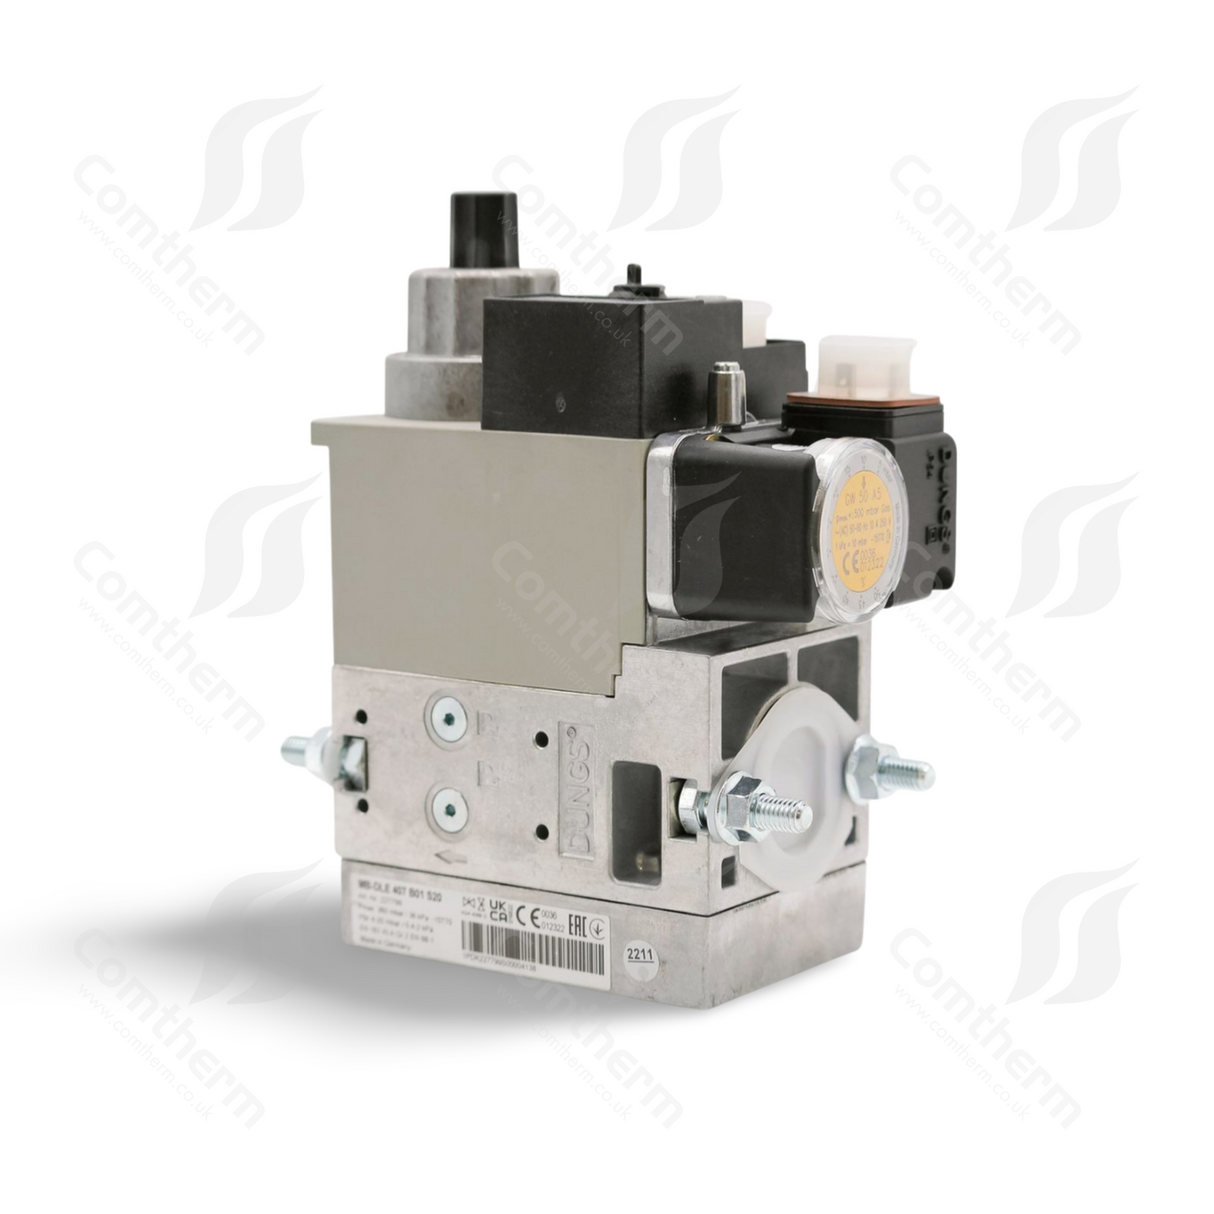 Dungs MB-DLE 407 B01 S50 + GW150A5 Multibloc Gas Valve - 110v